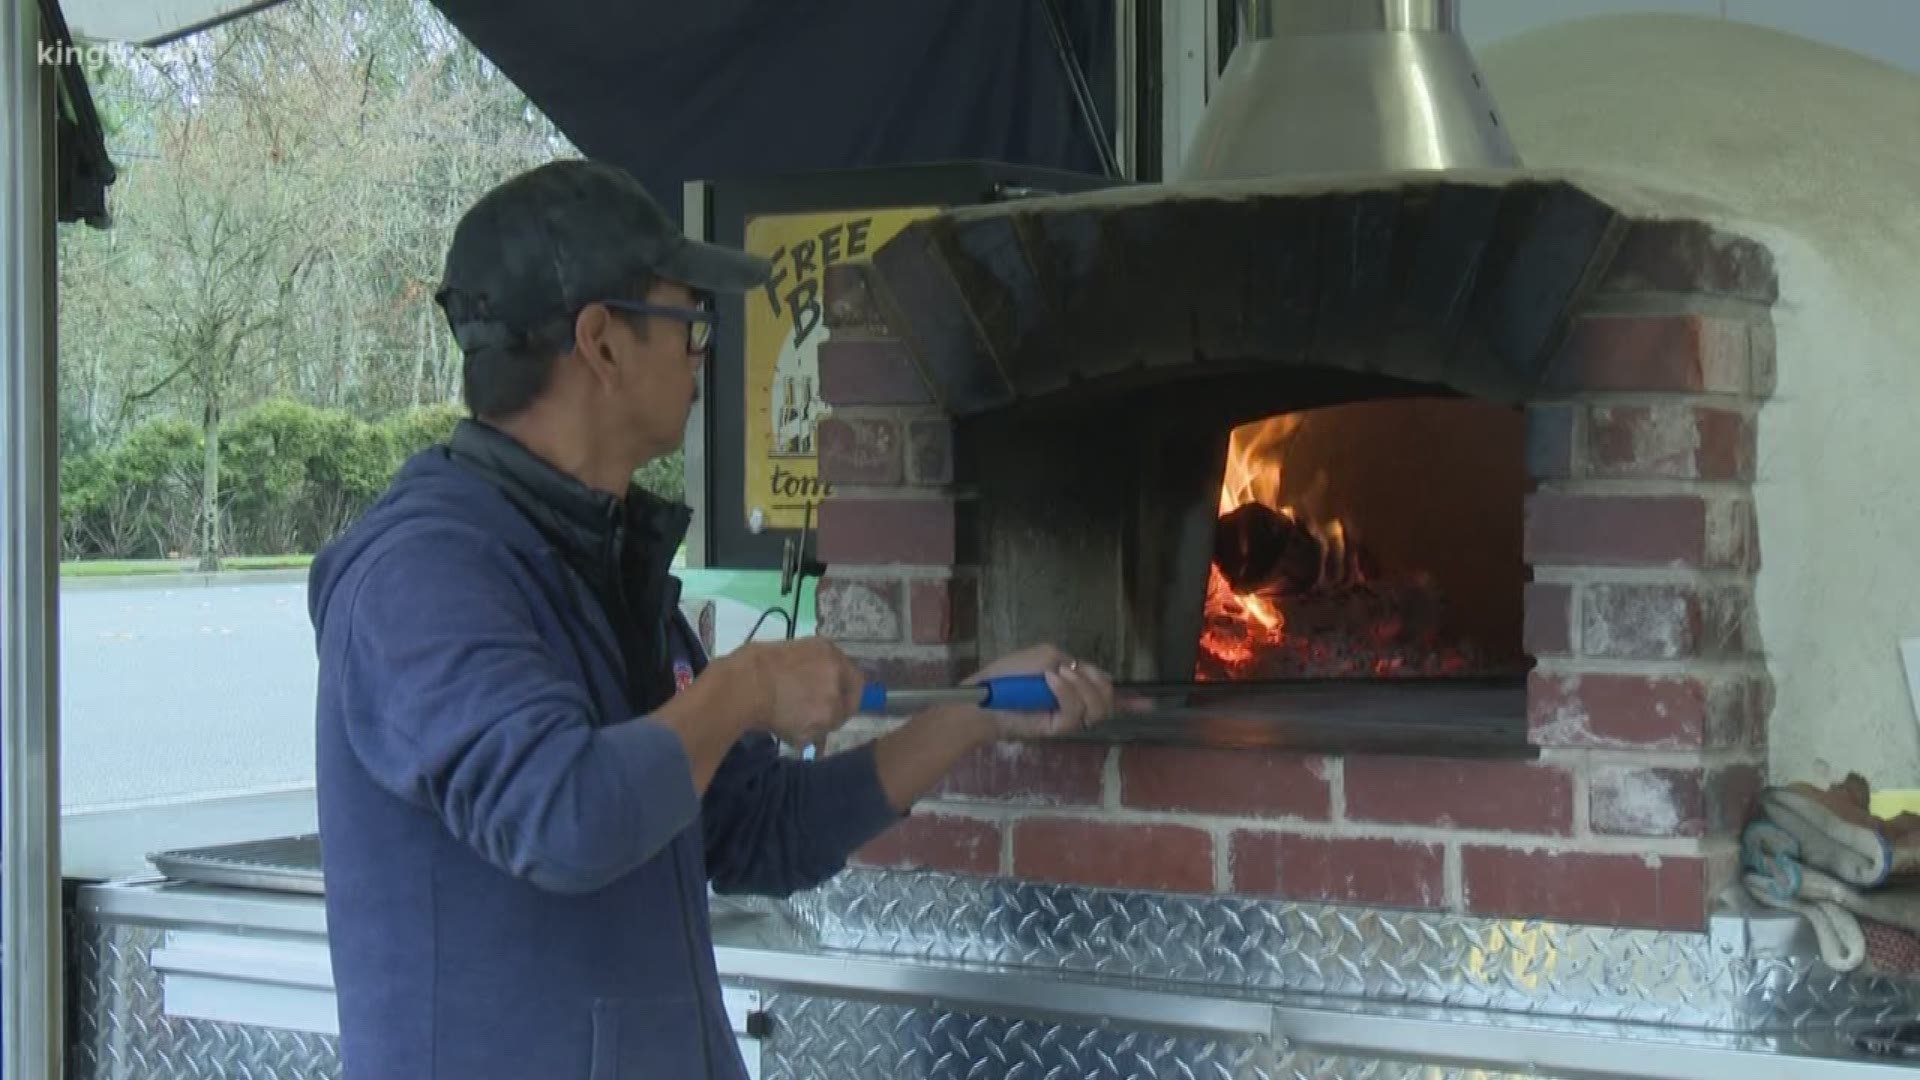 Bellevue's "In Pizza We Crust" uses a hand-built wood-fired stove on their food truck to offer a unique taste.